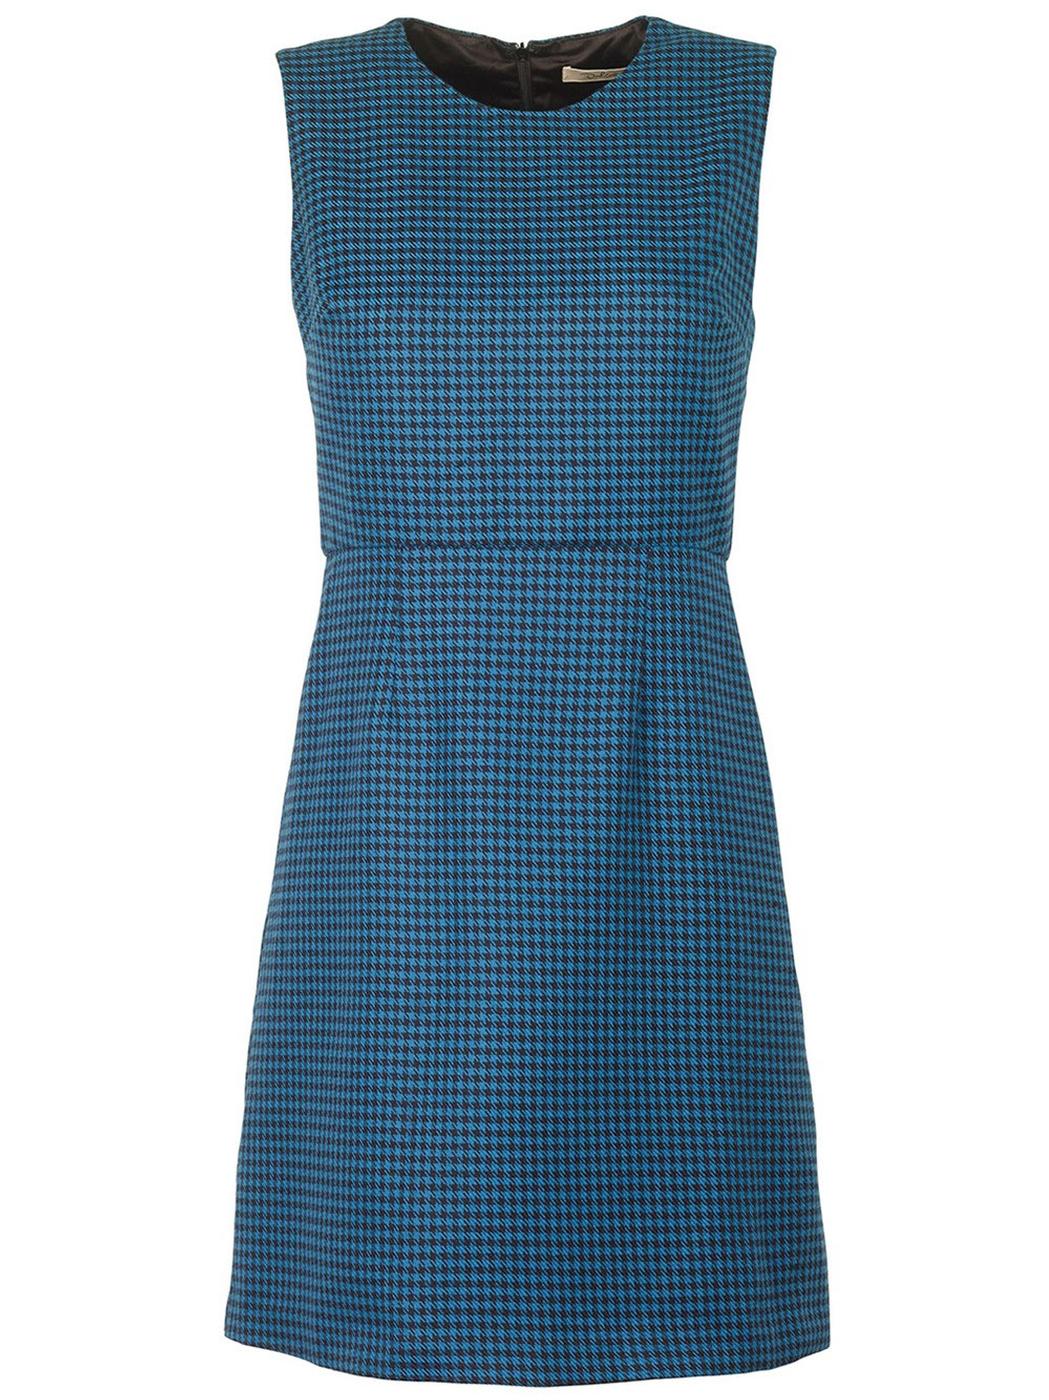 DARLING Enid Retro 60s Mod Houndstooth Check Dress in Teal